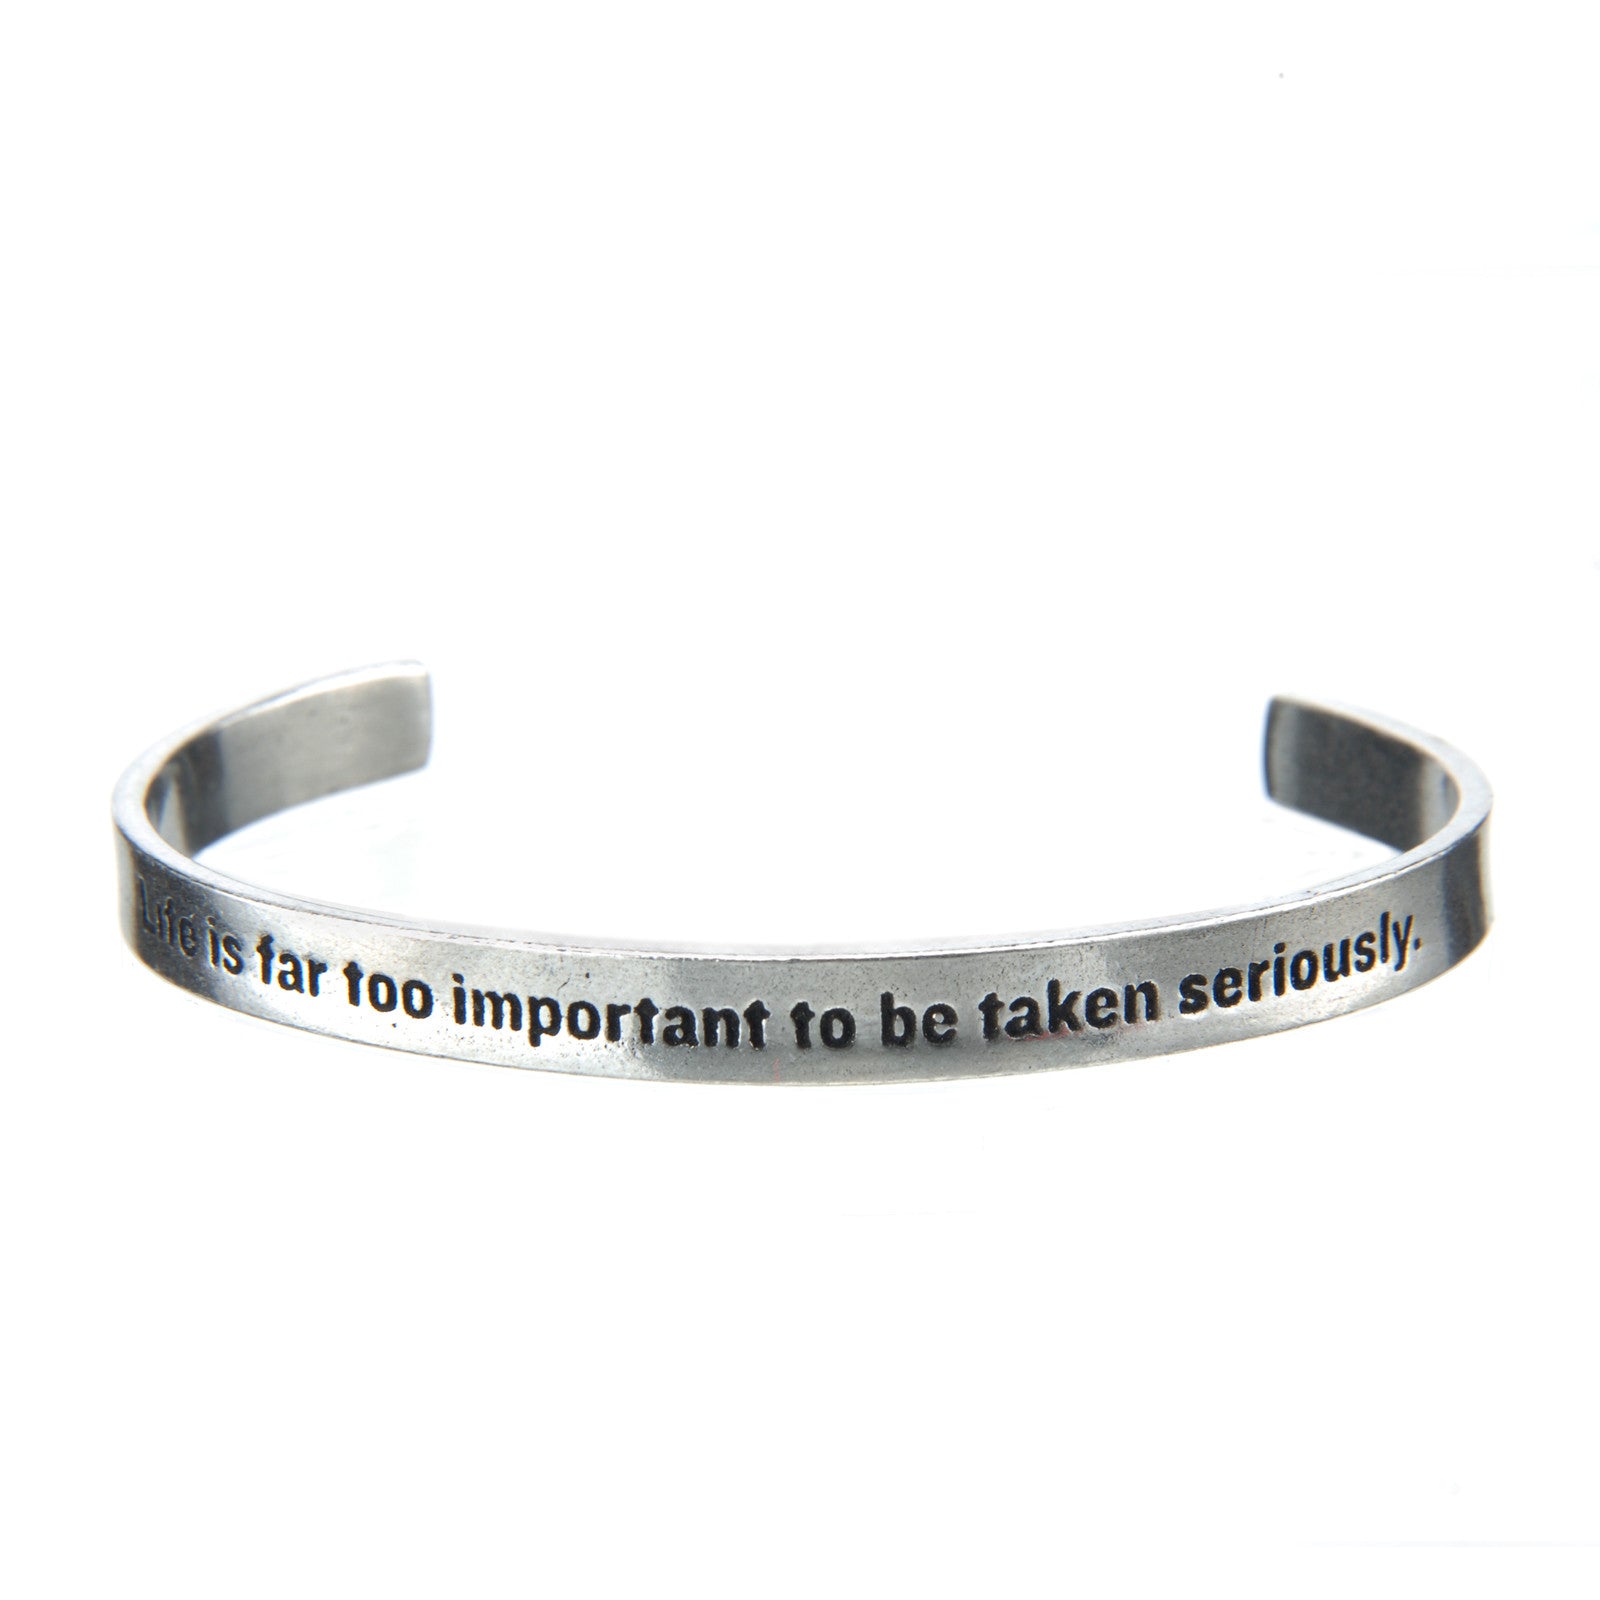 Life Is Far Too Important to be Taken Seriously Quotable Cuff Bracelet